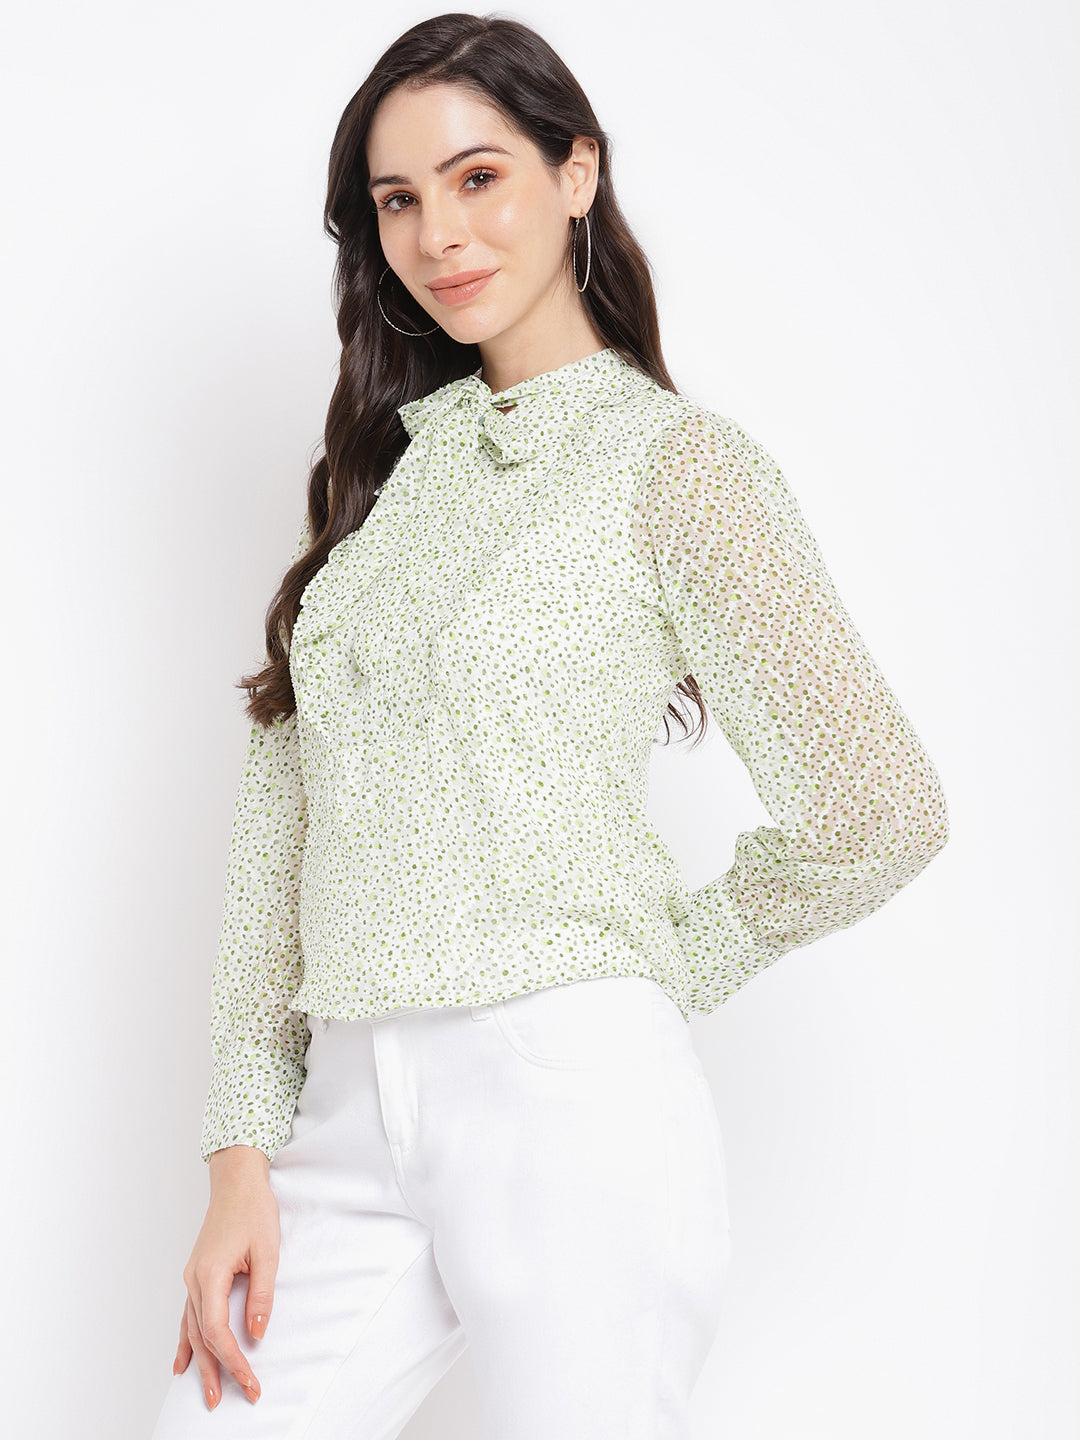 Green Full Sleeve Printed Polyester Blouse